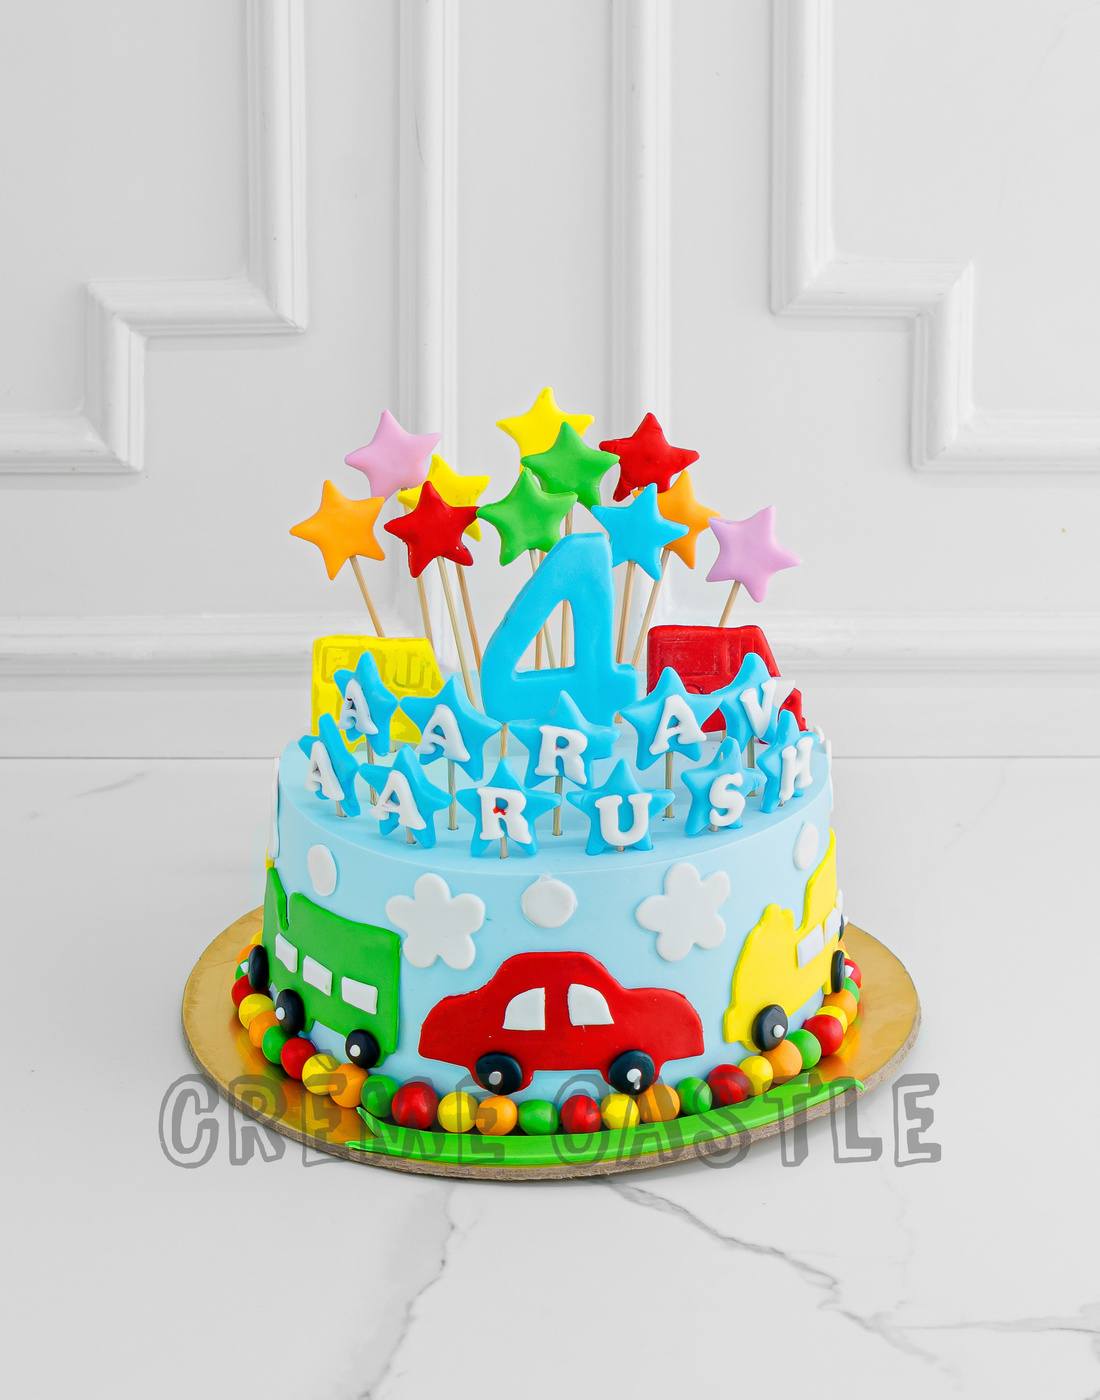 Cake Delivery in Whitefield Bangalore | Store Pickup | WarmOven